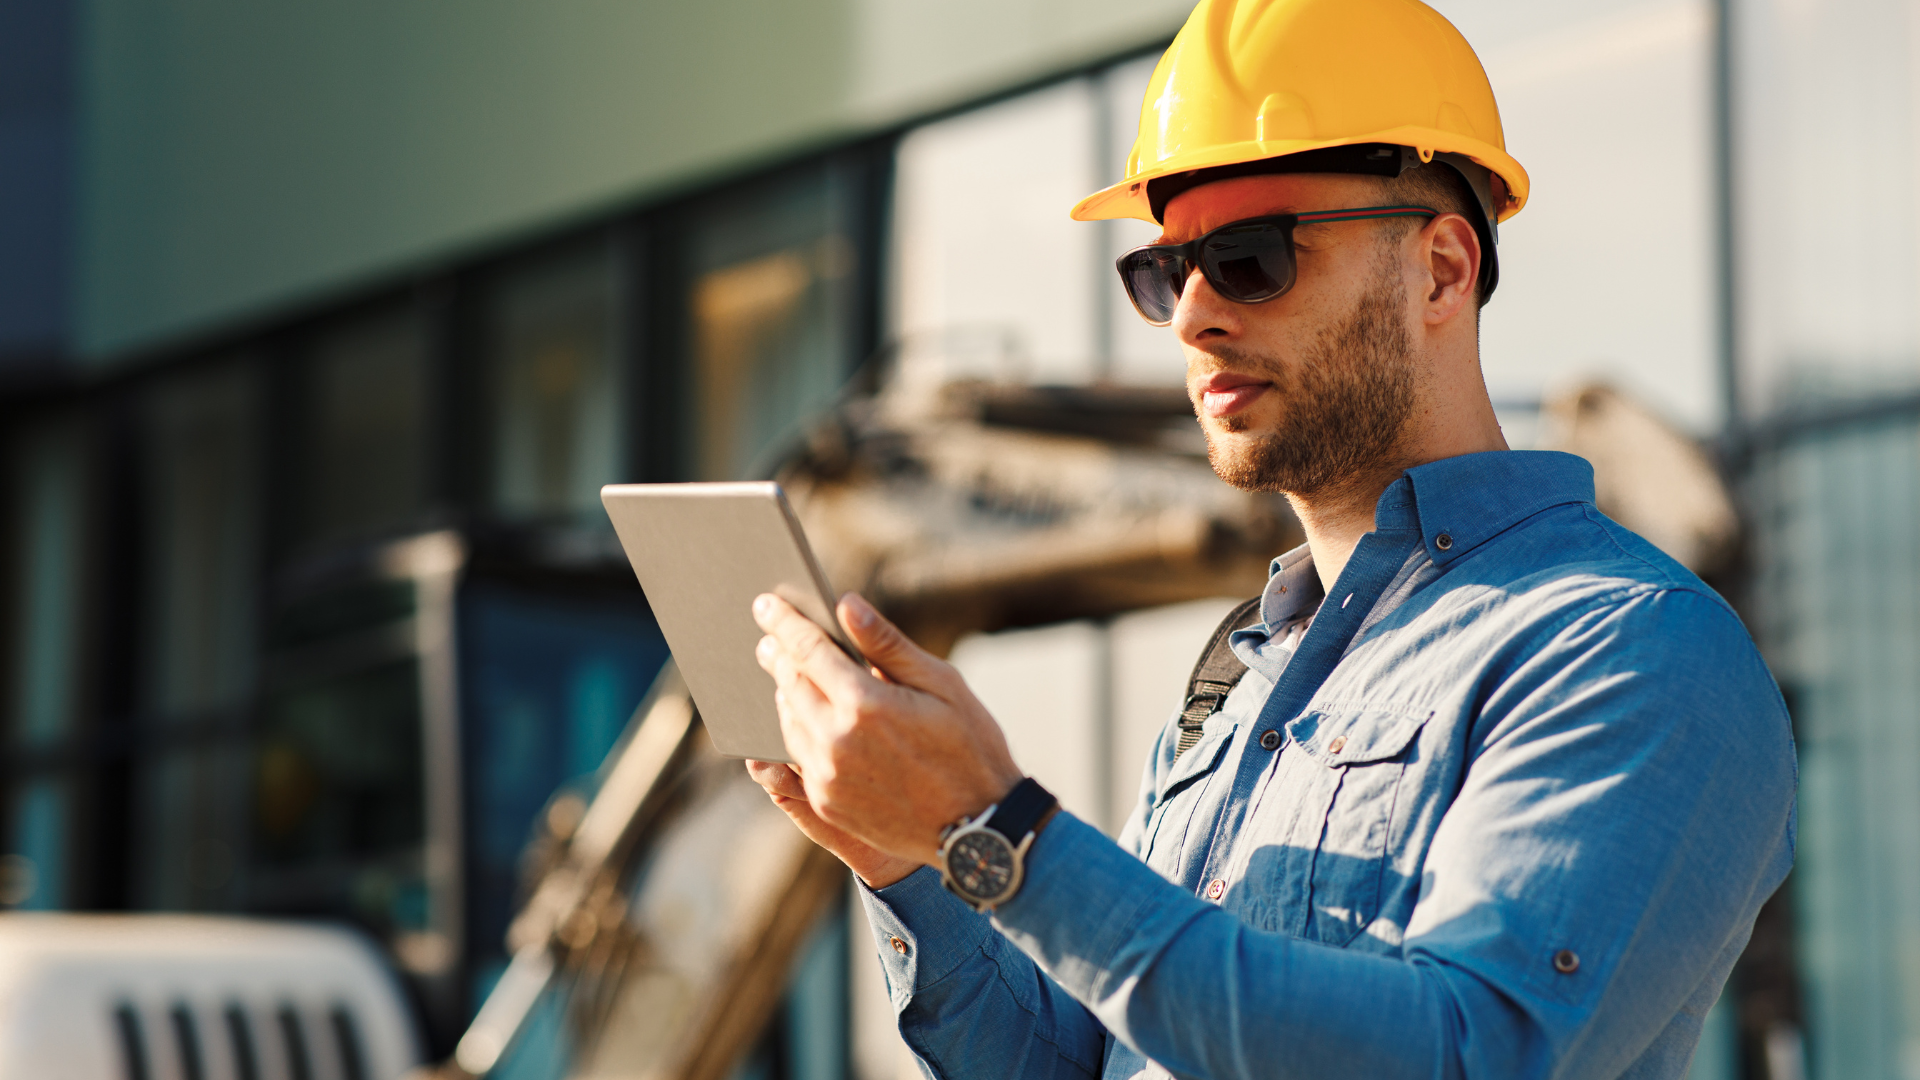 Construction worker on site in a hard hat, working from a tablet